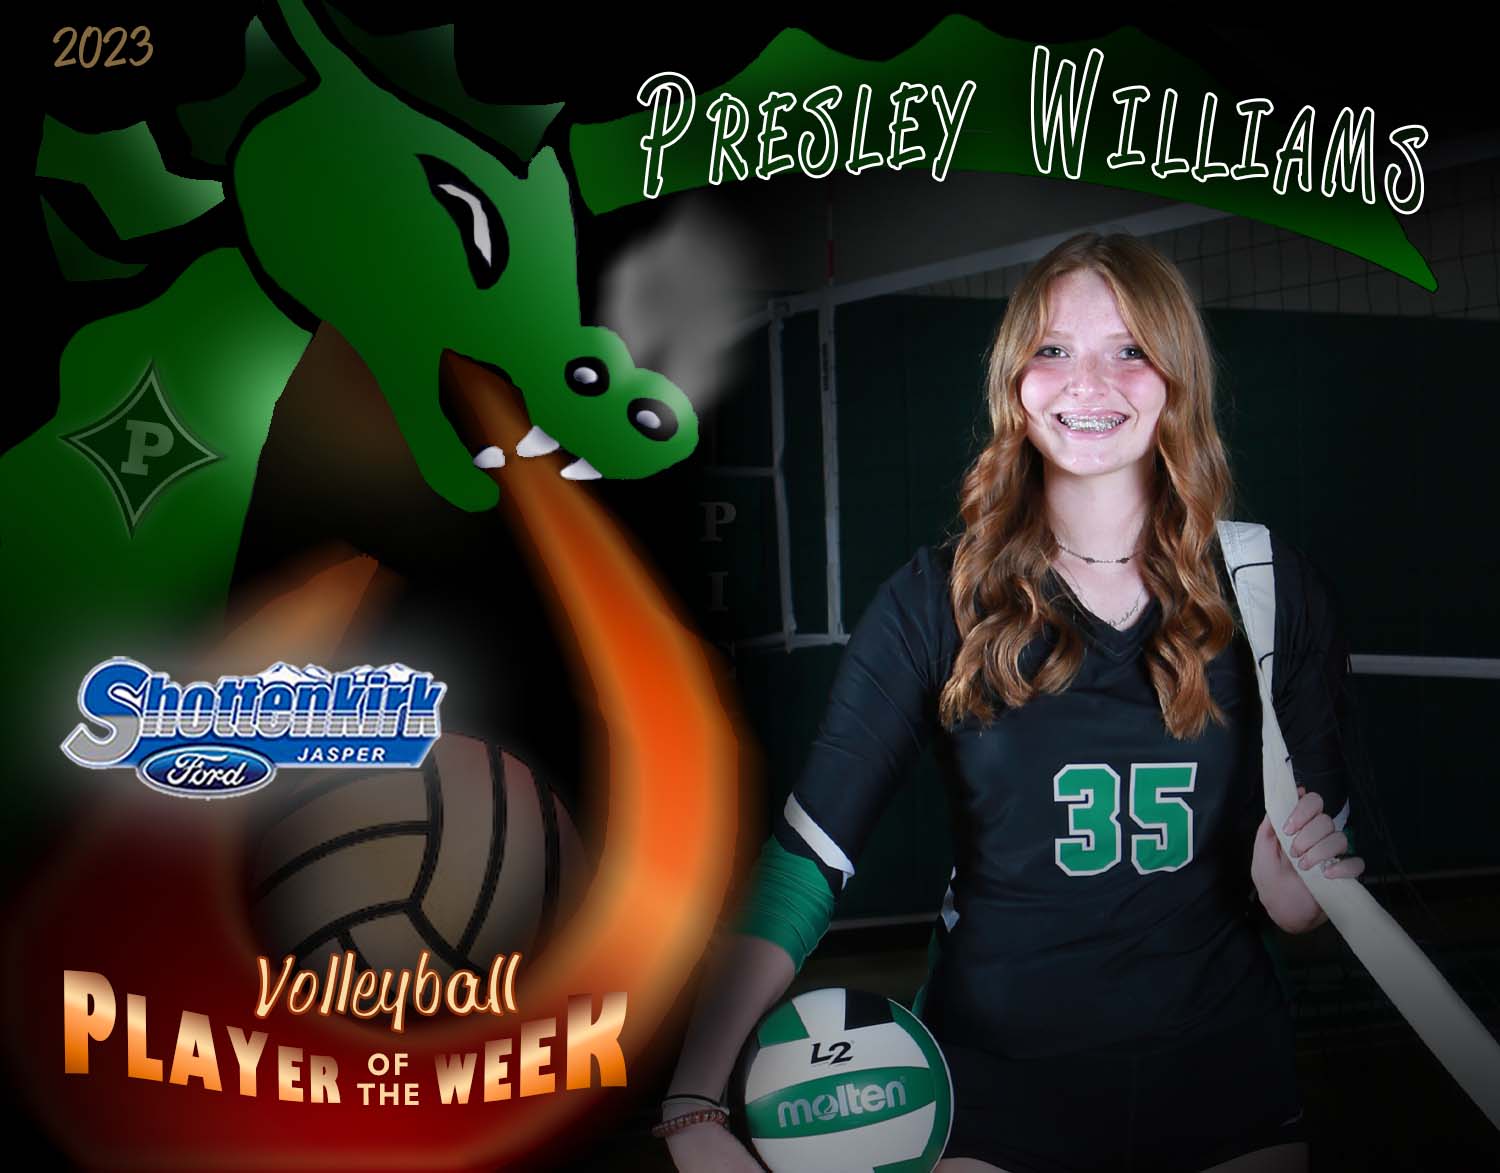 PHS Volleyball Player of the Week #2 - Presley Williams